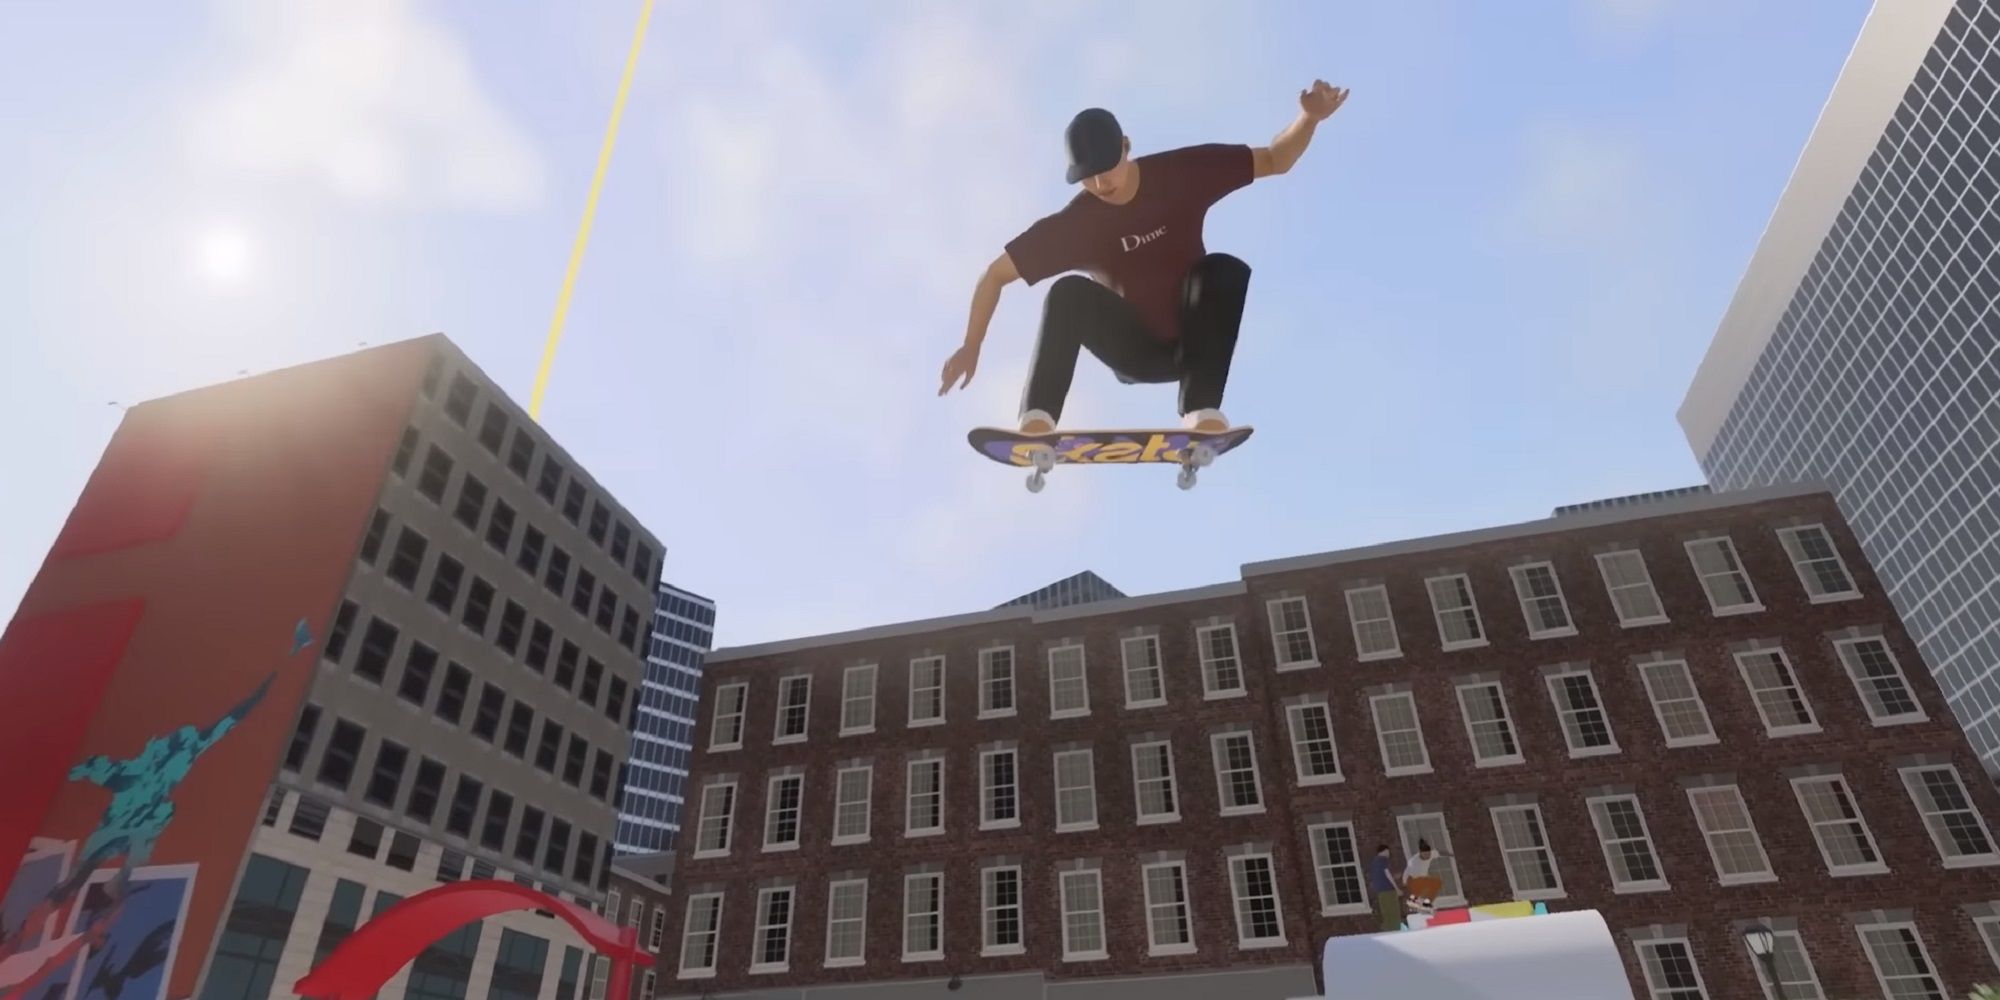 Skate 4 gameplay leak draws mixed reaction from fans - Dexerto